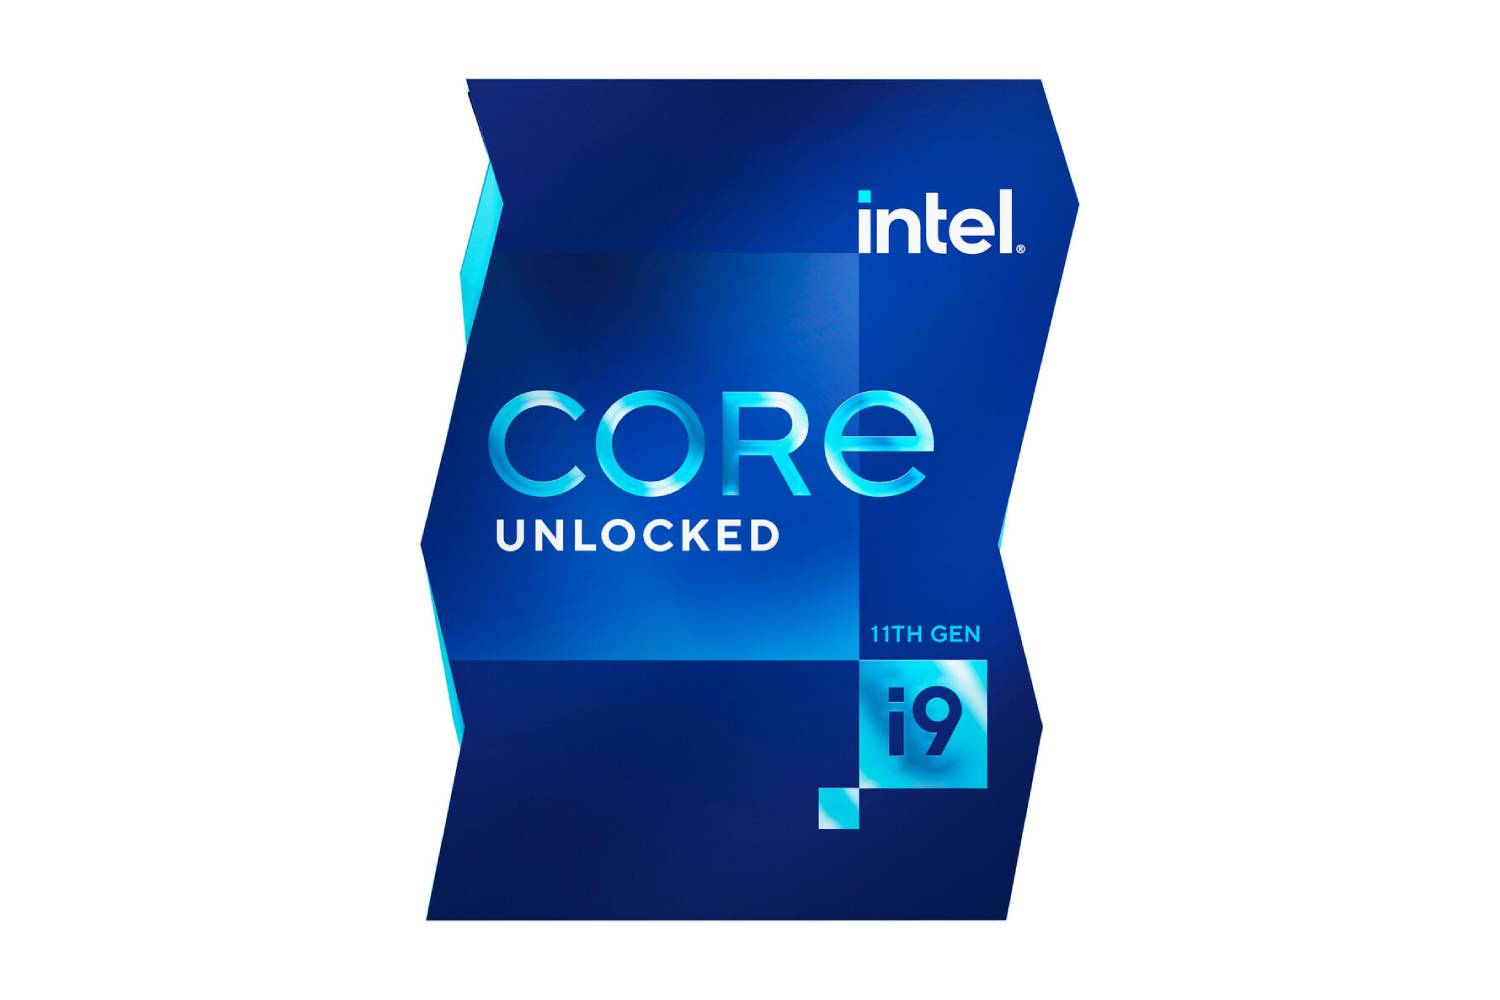 Intel core i9 11900kf 11th Gen 16M Cache, up to 5.30 GHz CPU 